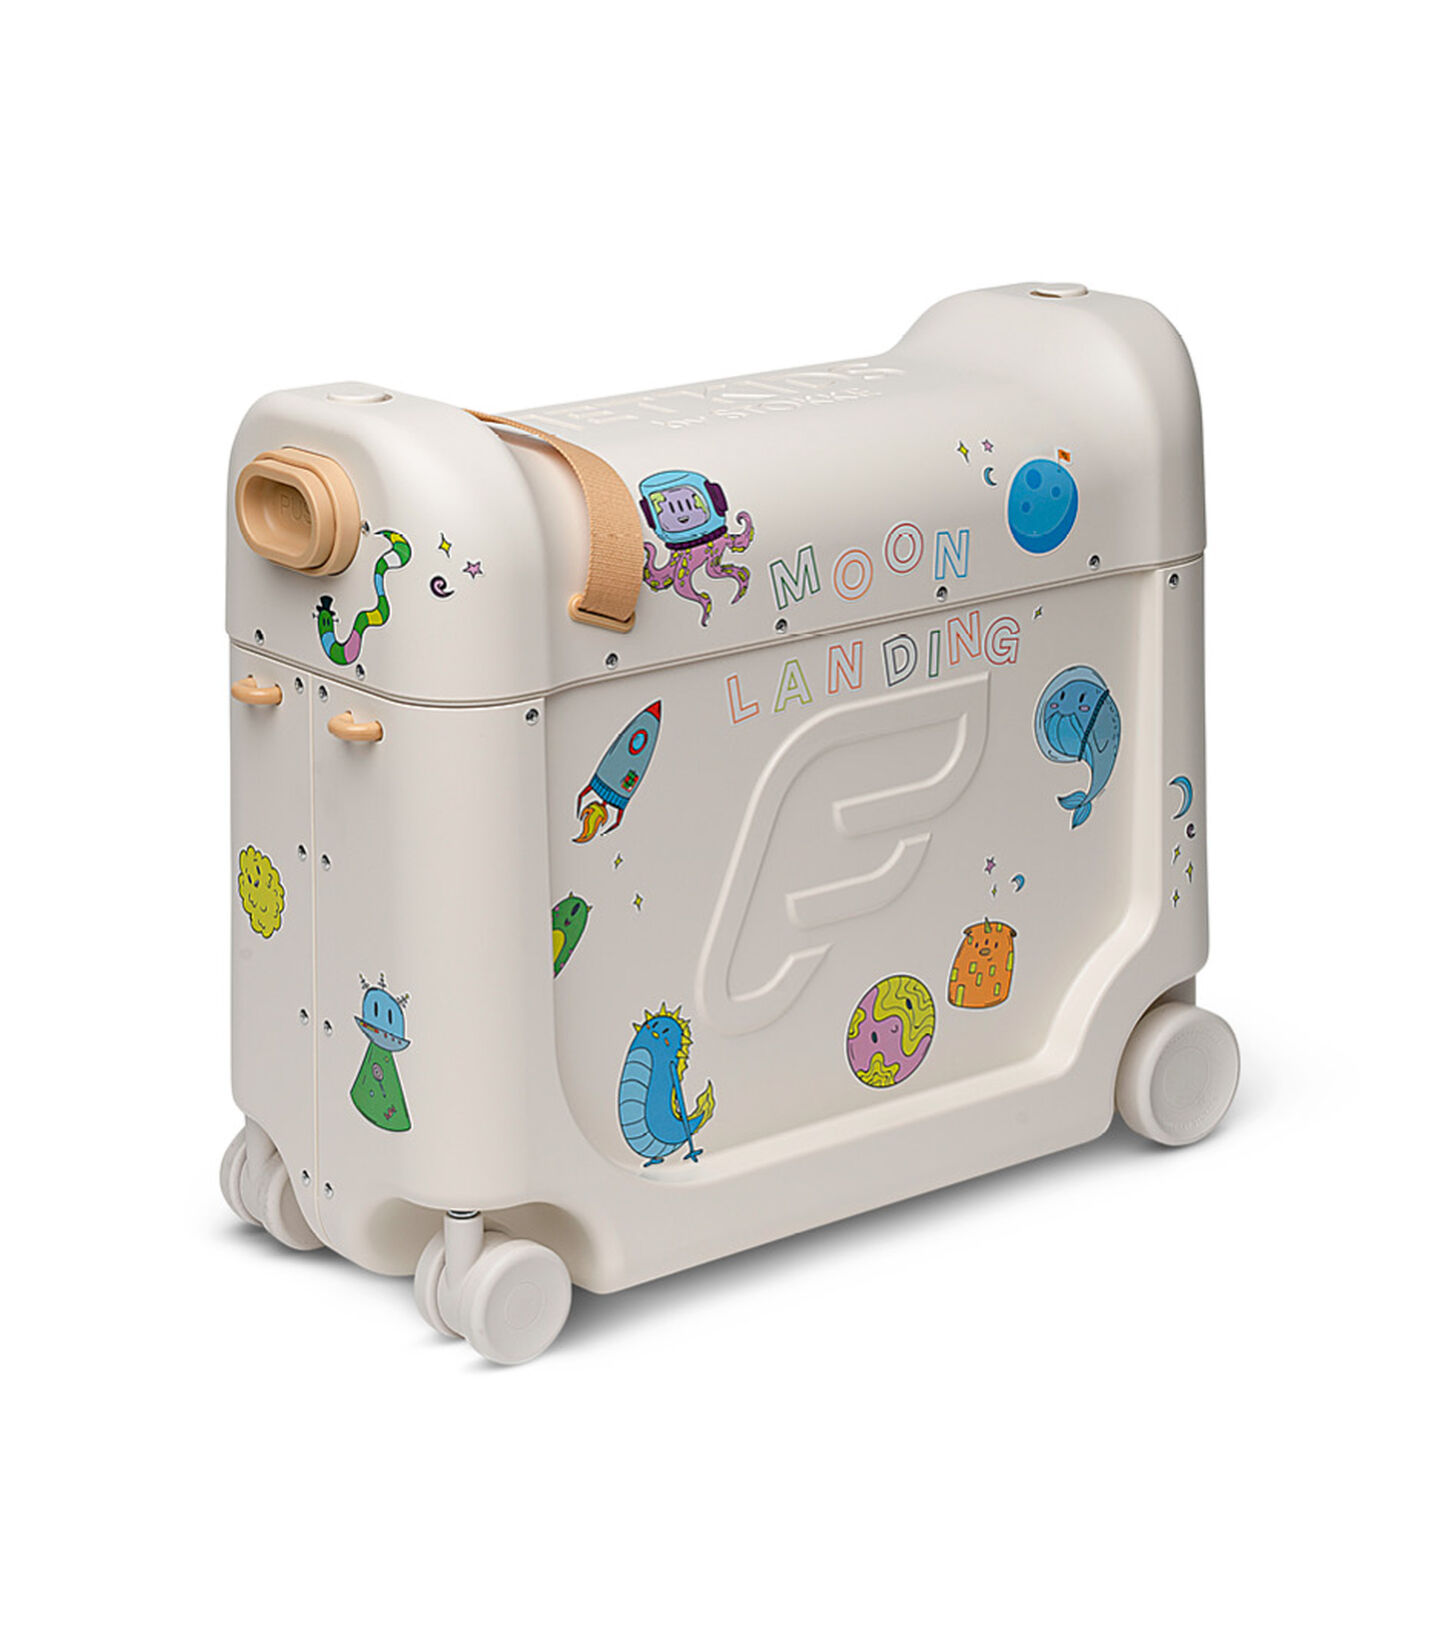 JetKids™ by Stokke® BedBox V3 in Full Moon White Decorated with Stickers. view 1